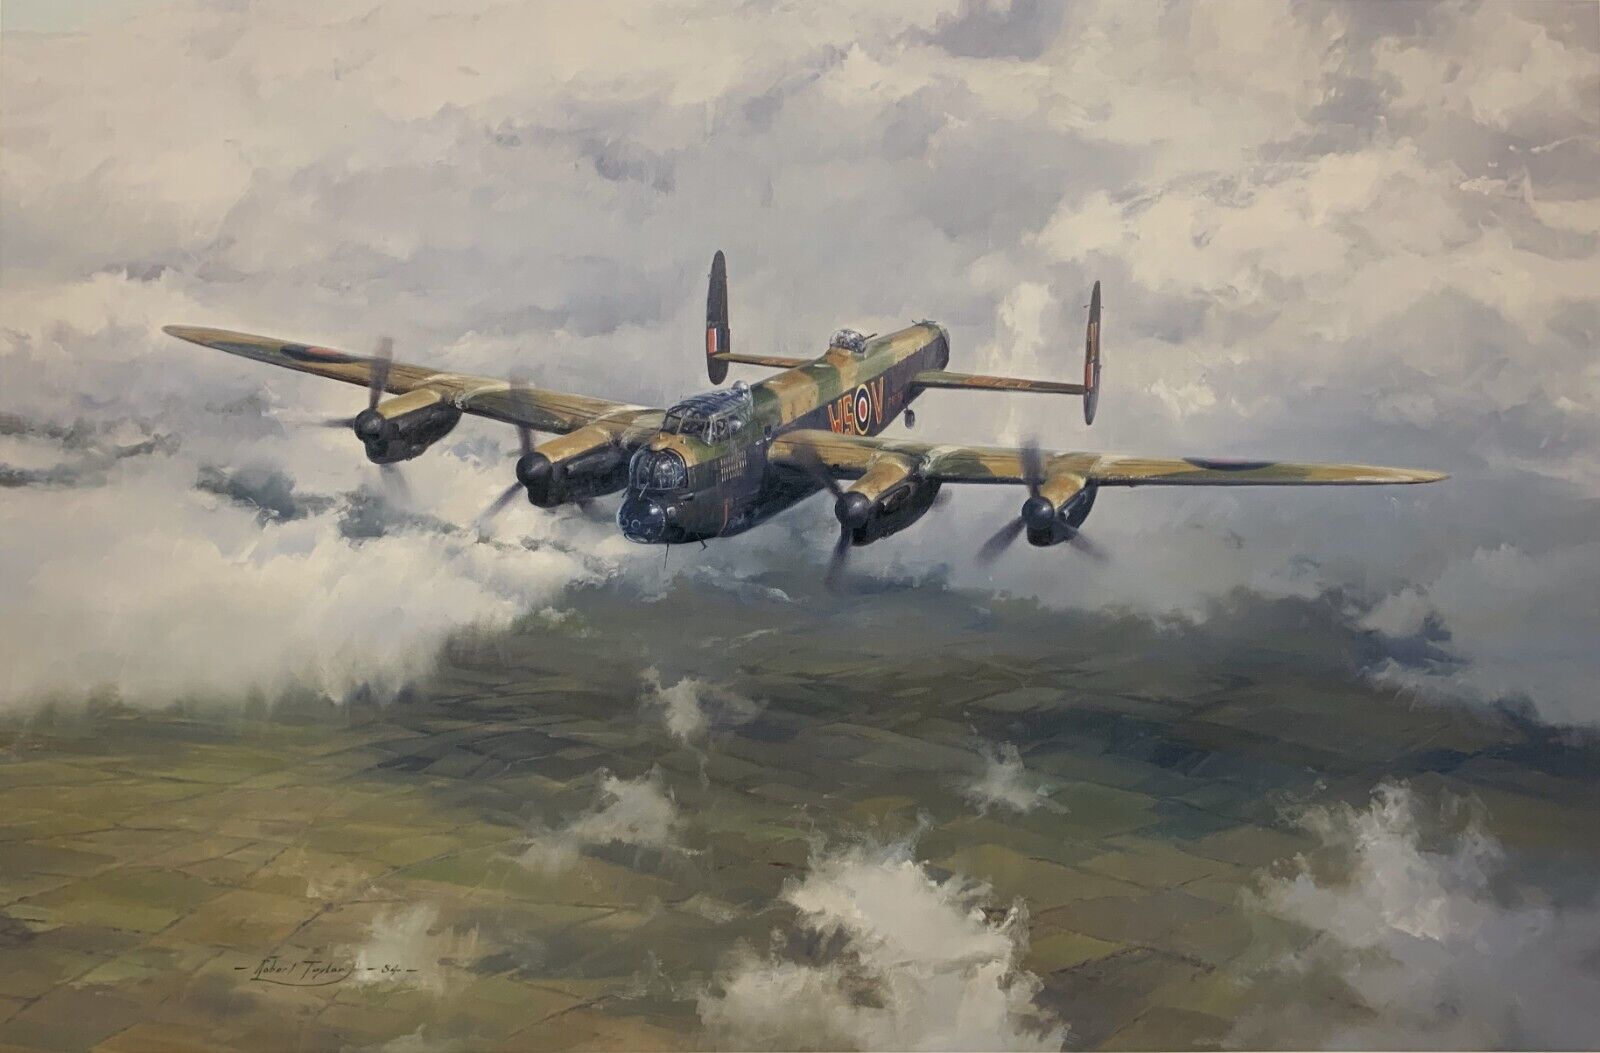 Almost Home by Robert Taylor aviation art signed by RAF Lancaster Aircrew